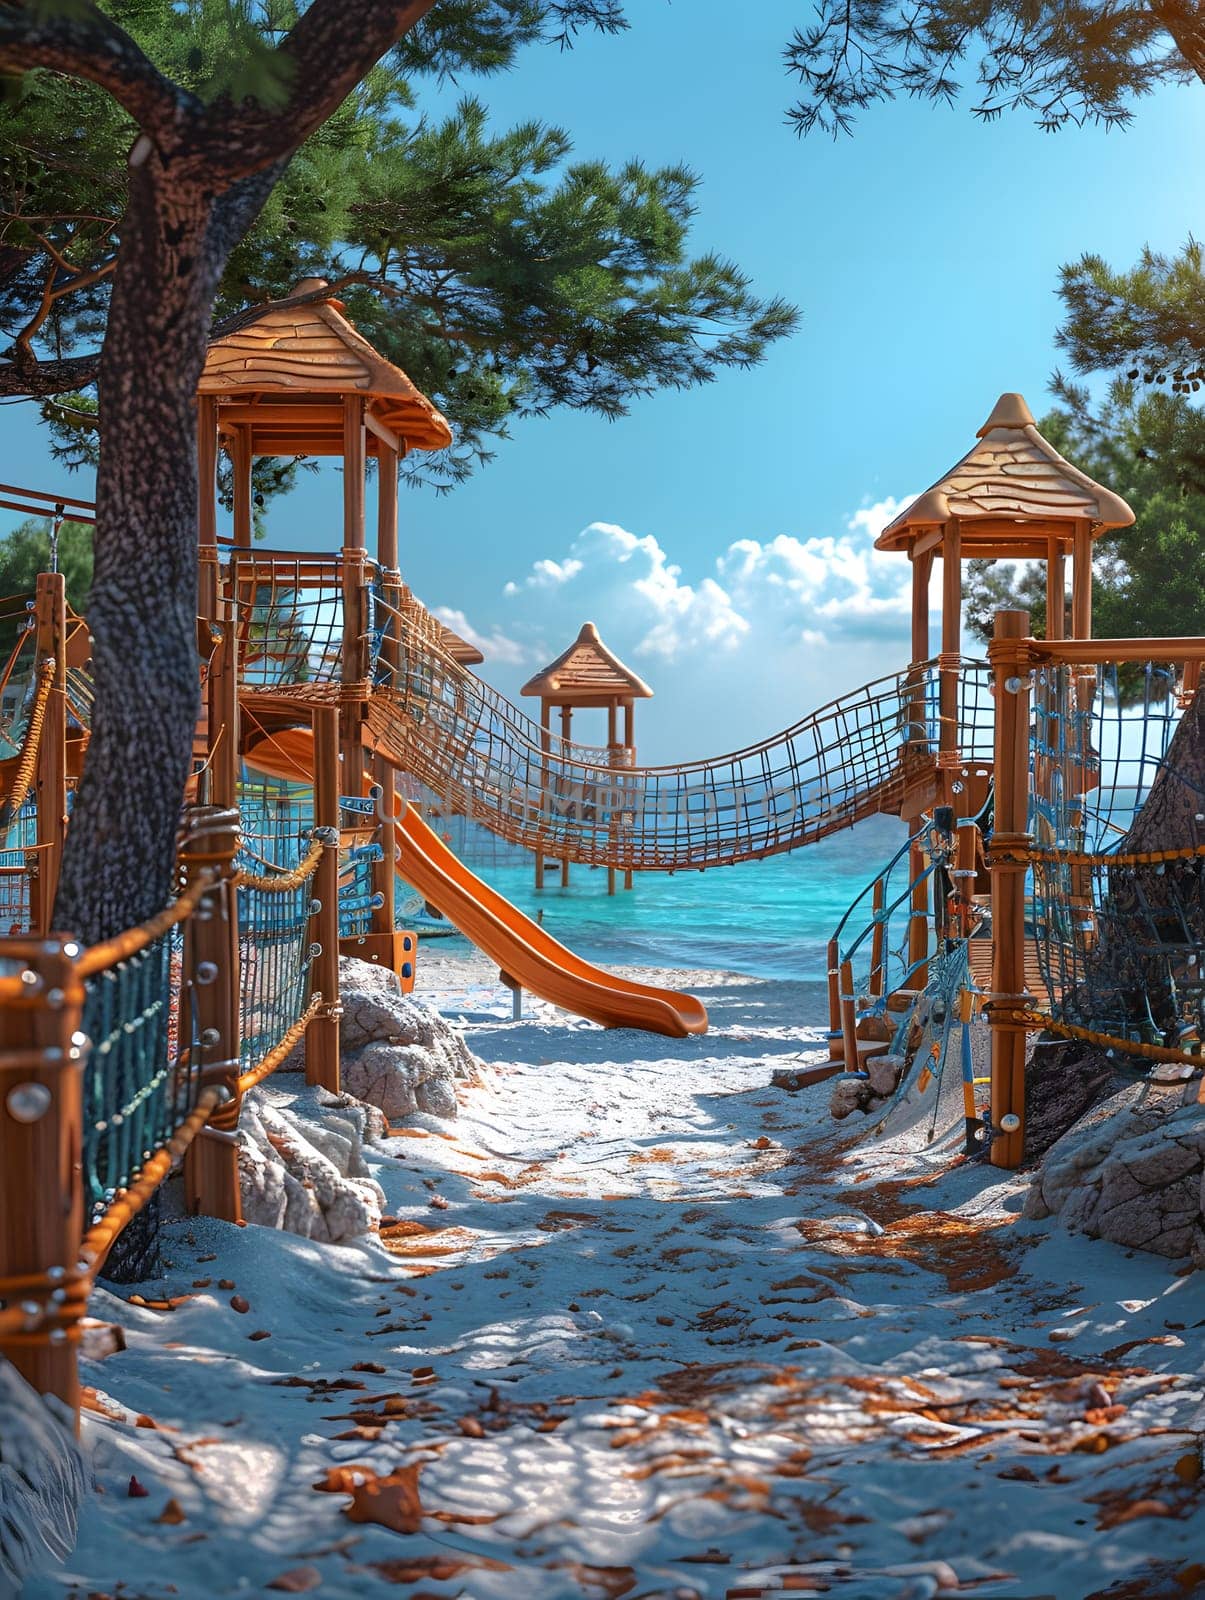 a wooden playground with a slide and a bridge over the ocean by Nadtochiy